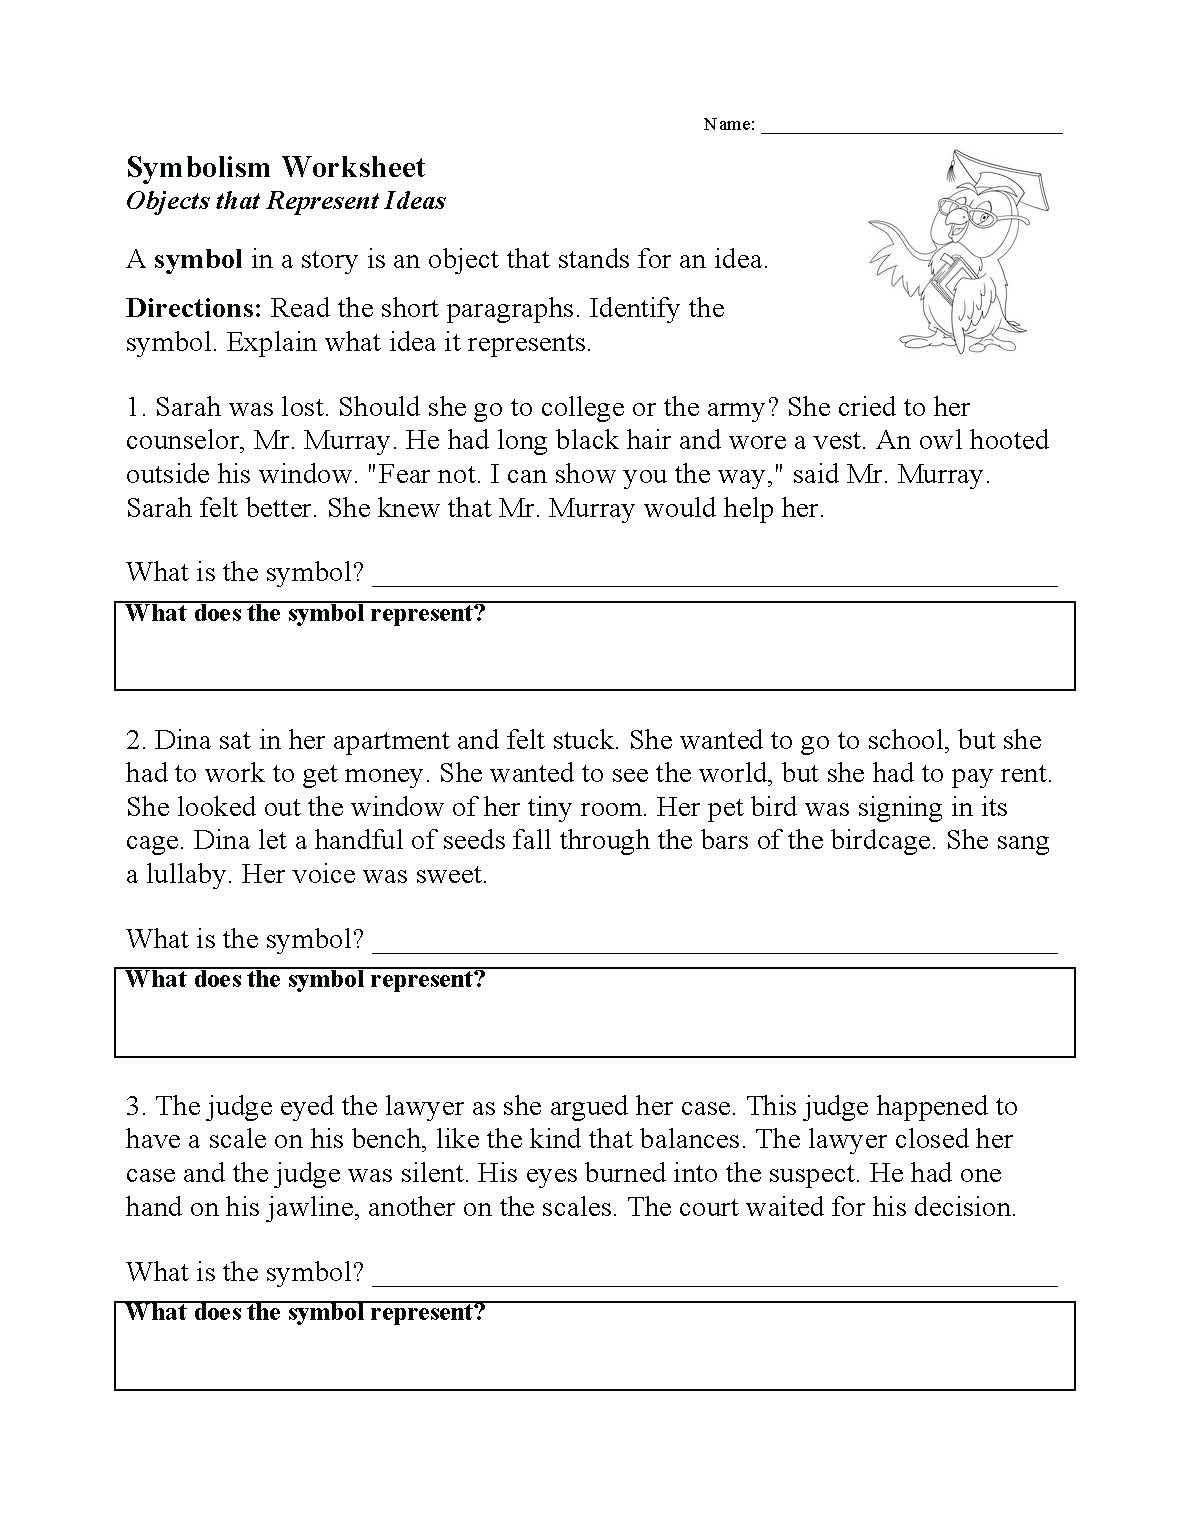 This is a preview image of our Symbolism Worksheet. Click on it to enlarge or view the source file.